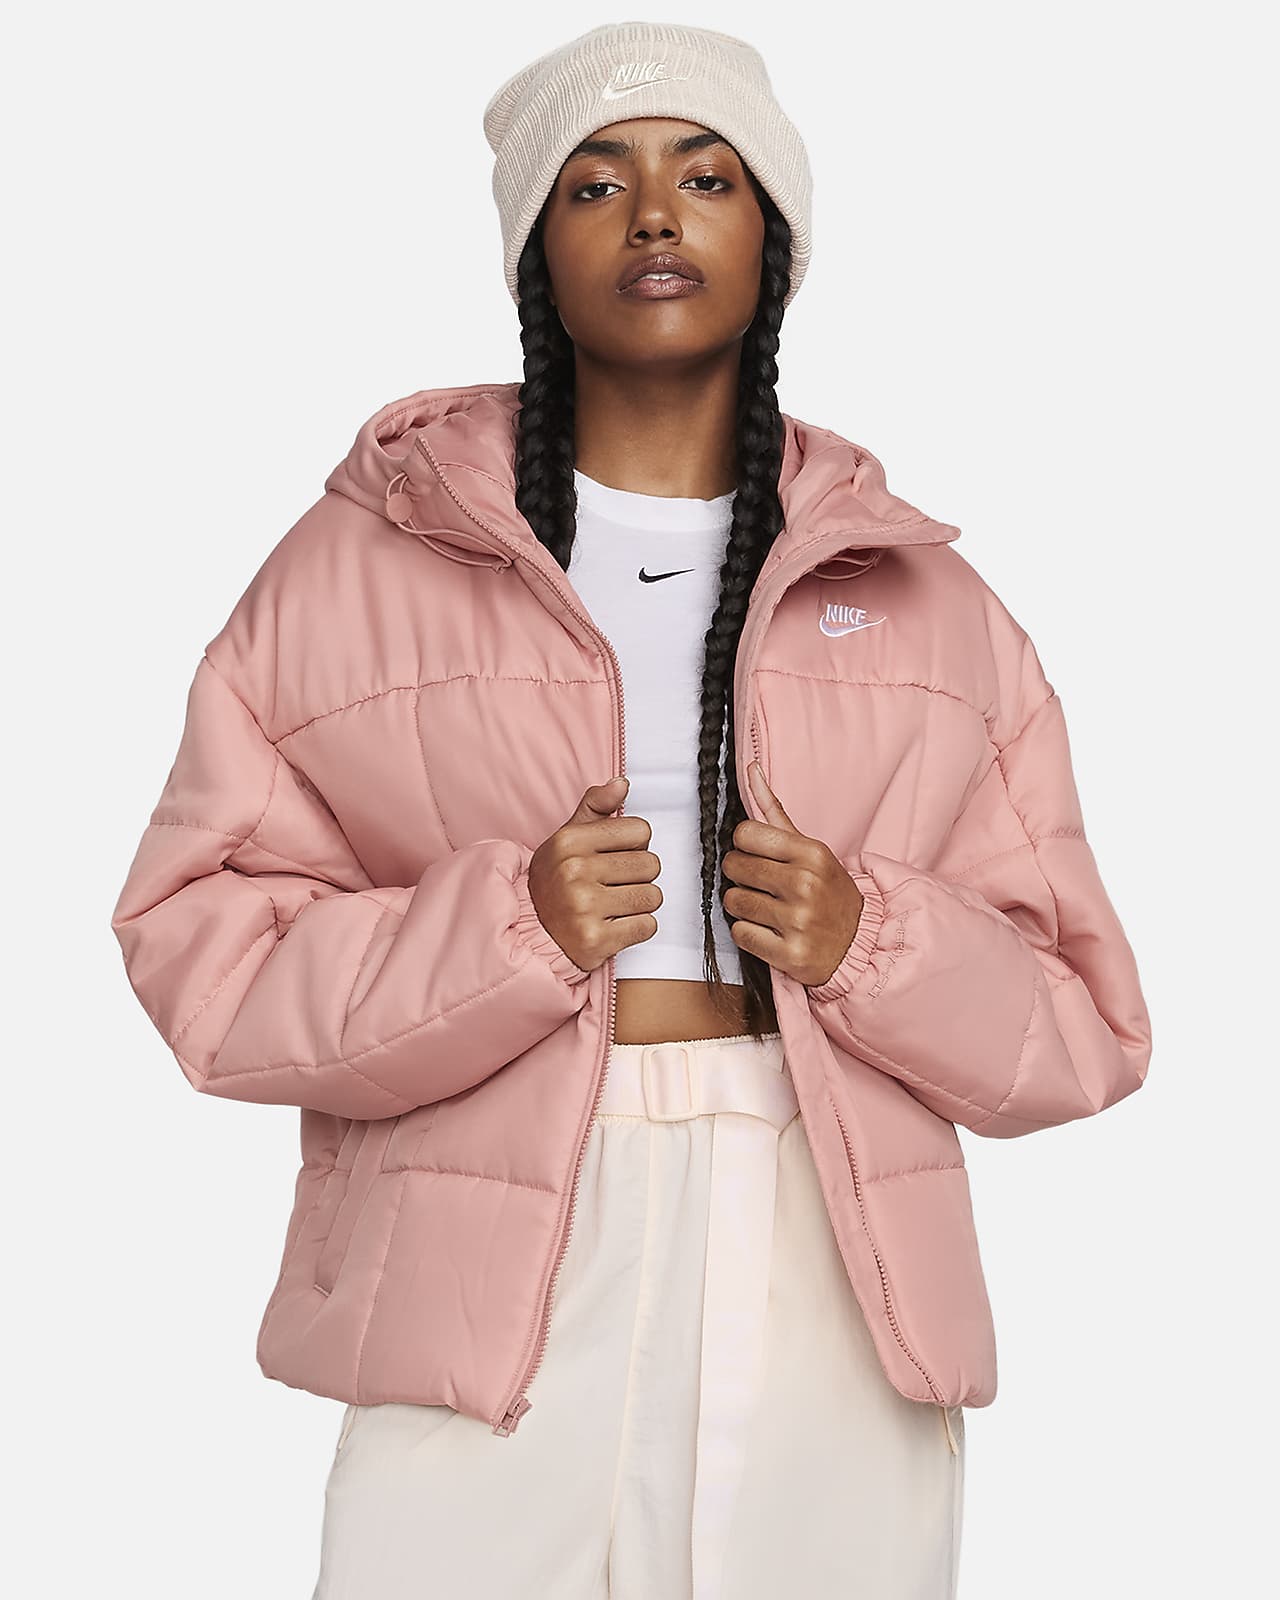 https://static.nike.com/a/images/t_PDP_1280_v1/f_auto,q_auto:eco/442955db-2e4a-40e9-a6df-6ab701035503/sportswear-classic-puffer-loose-hooded-jacket-ft53SK.png